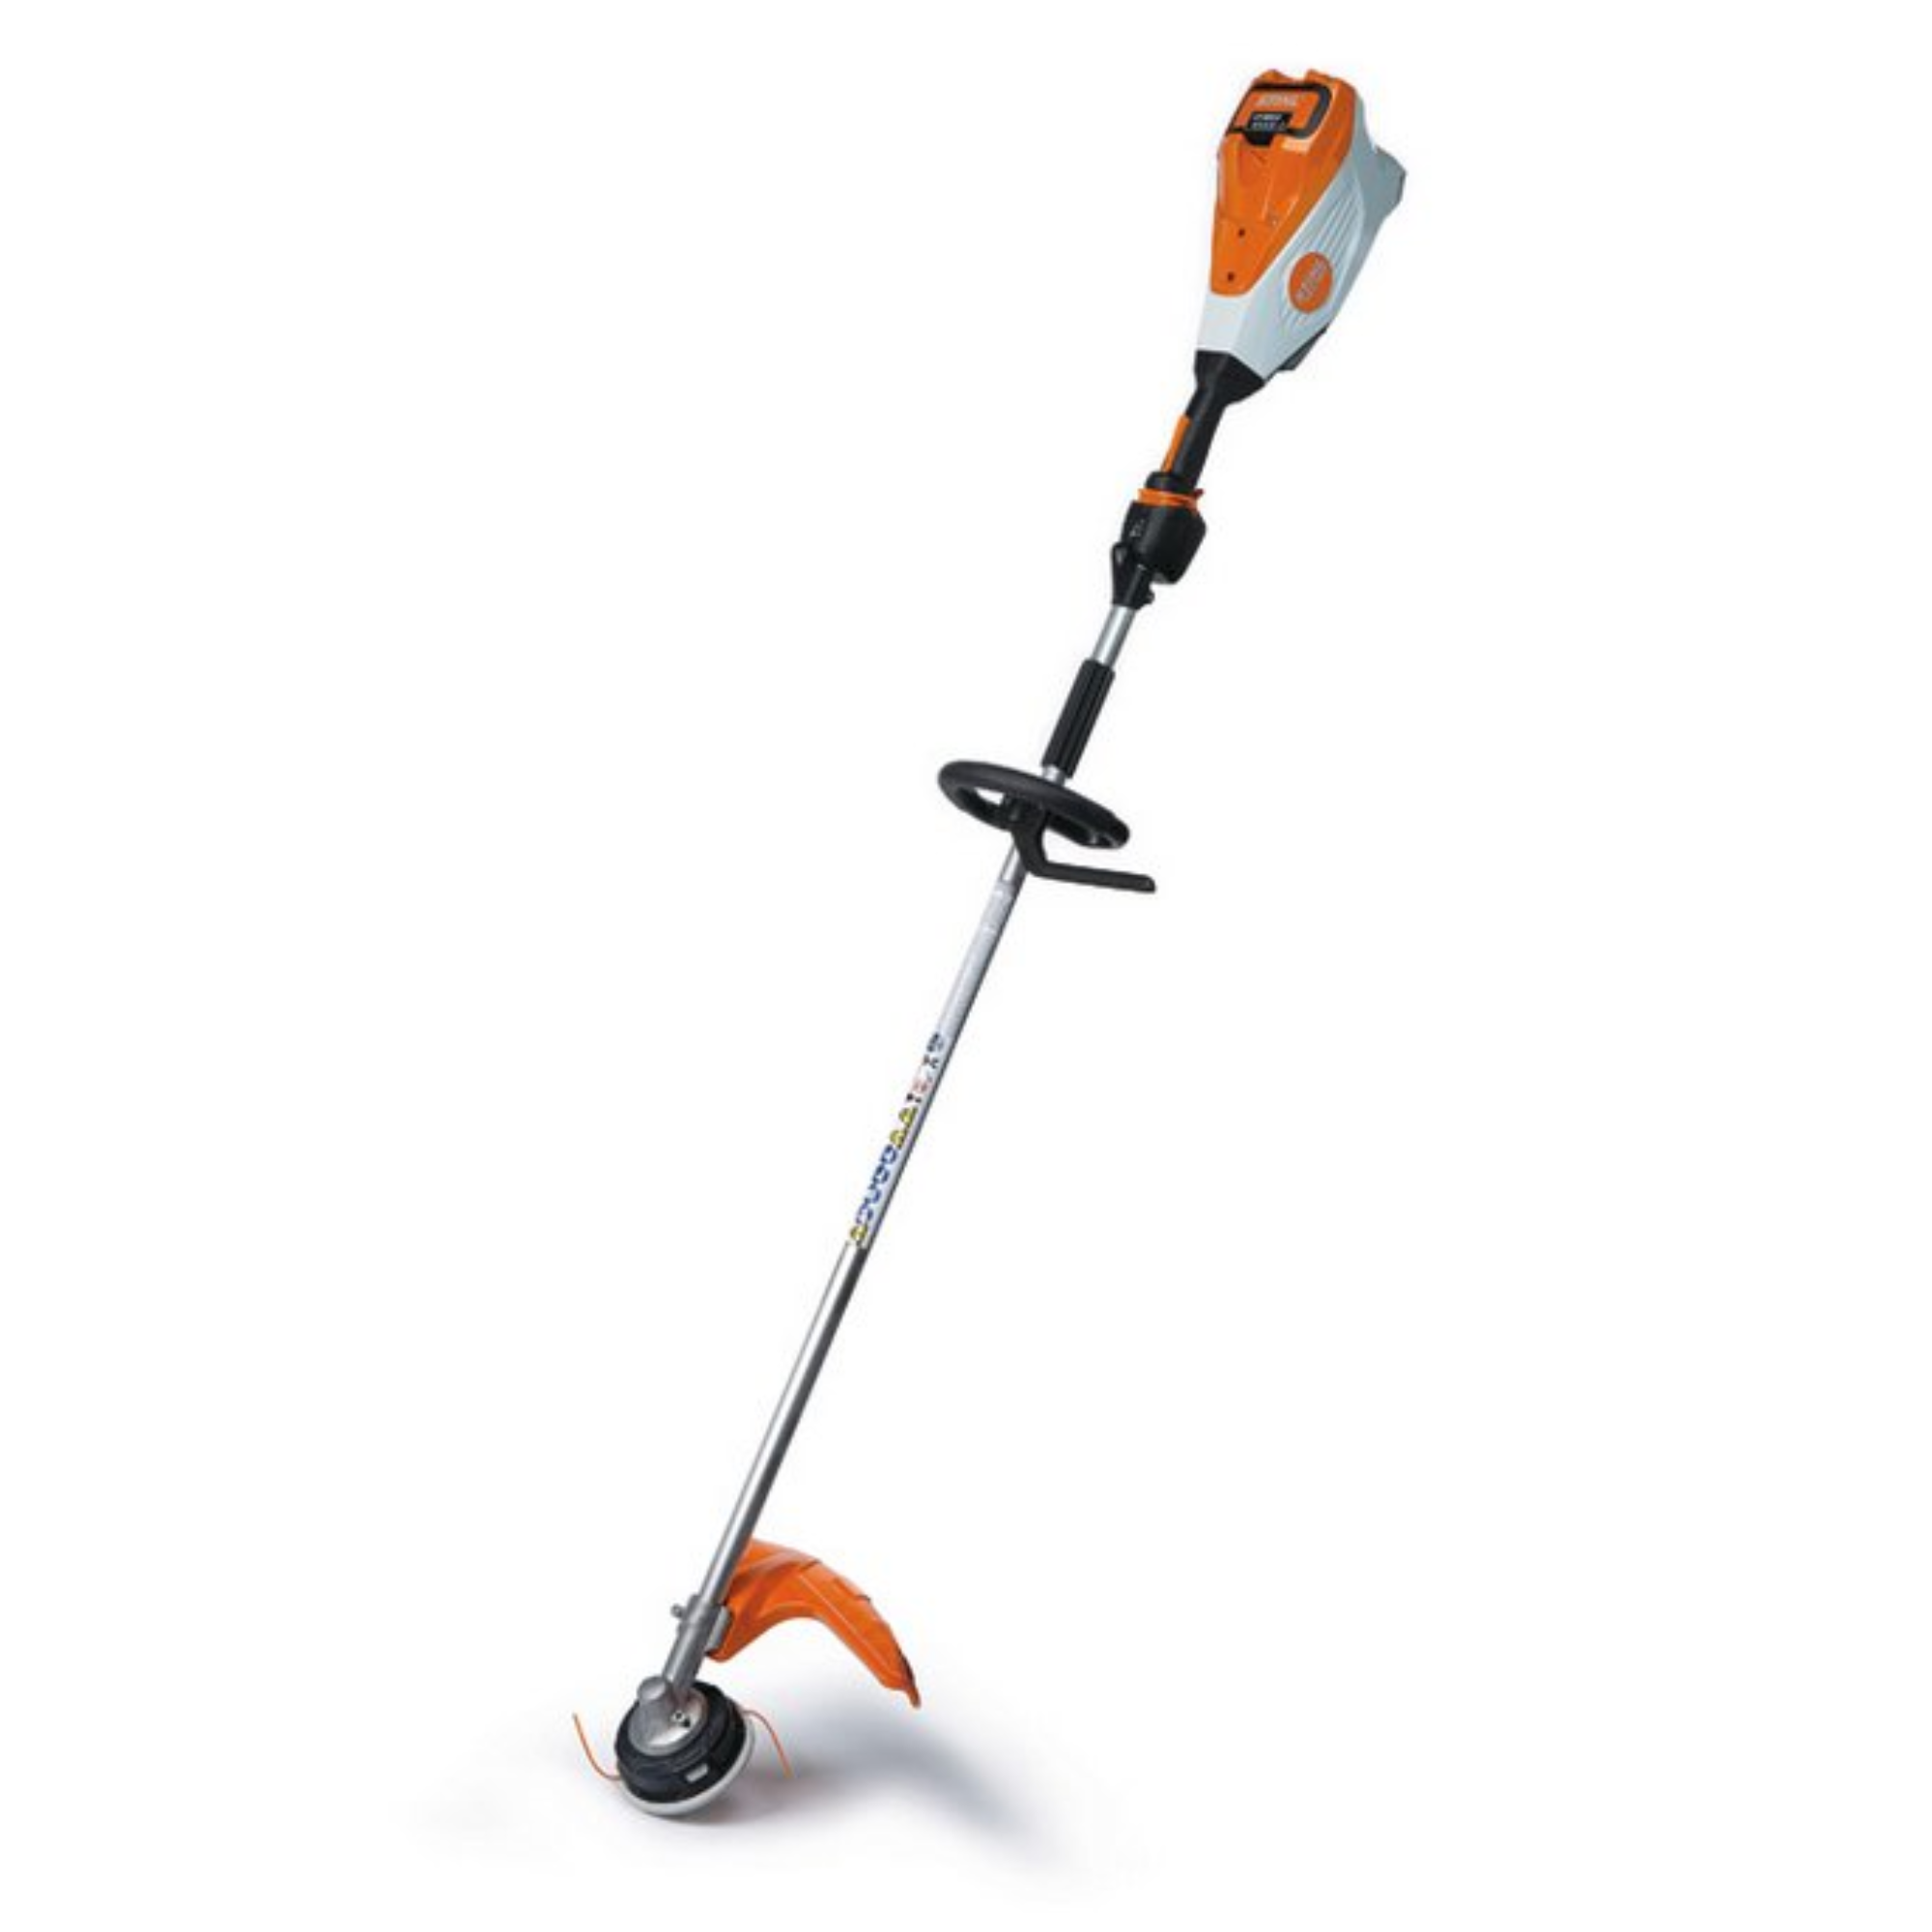 Stihl FSA 135 R Battery Powered String Trimmer | Tool Only